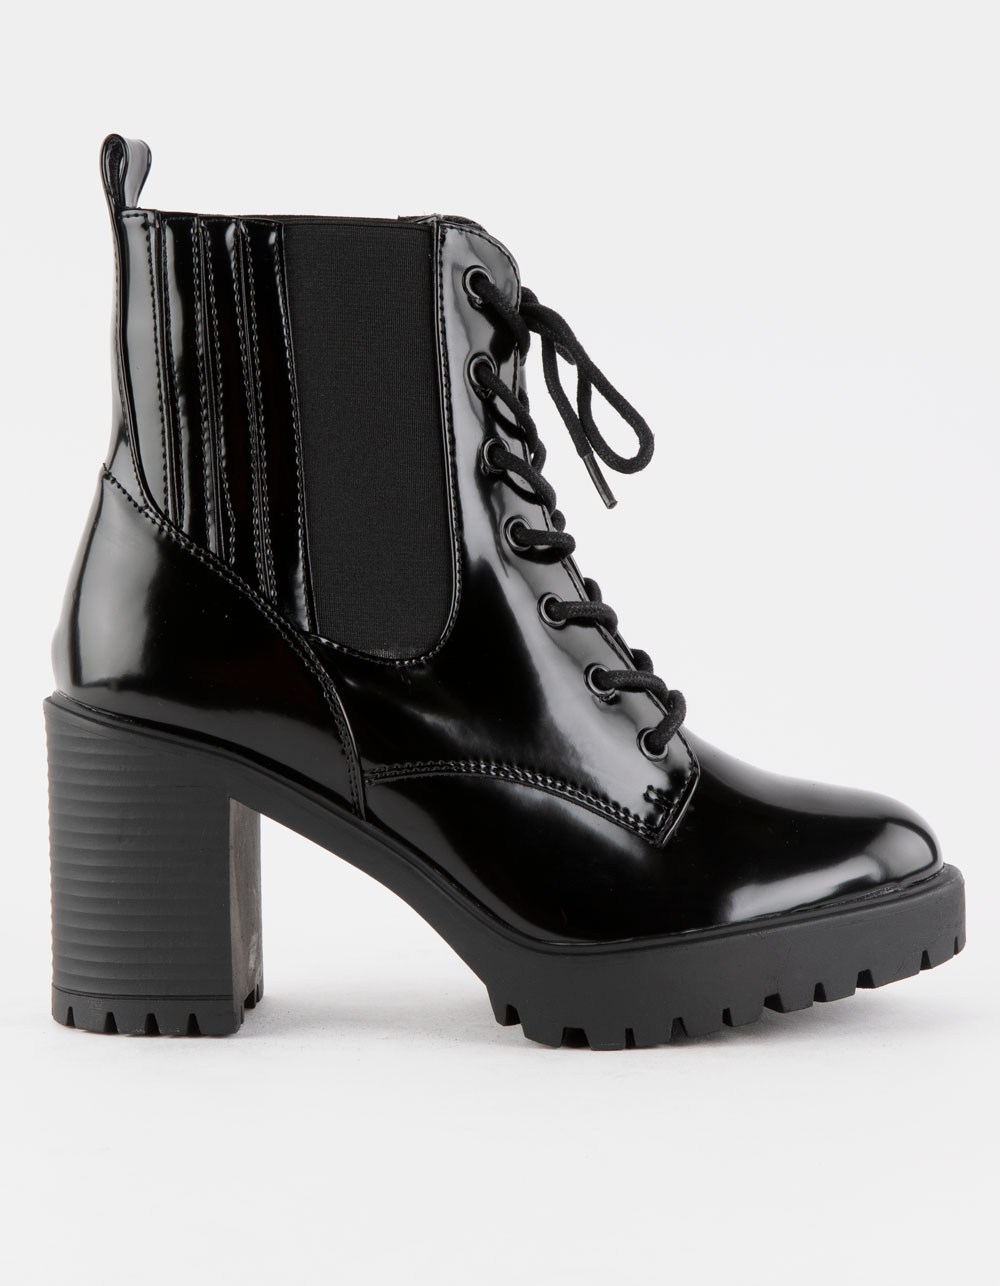 MIA Daryl Lace Up Heel Womens Boots - BLACK | Tillys